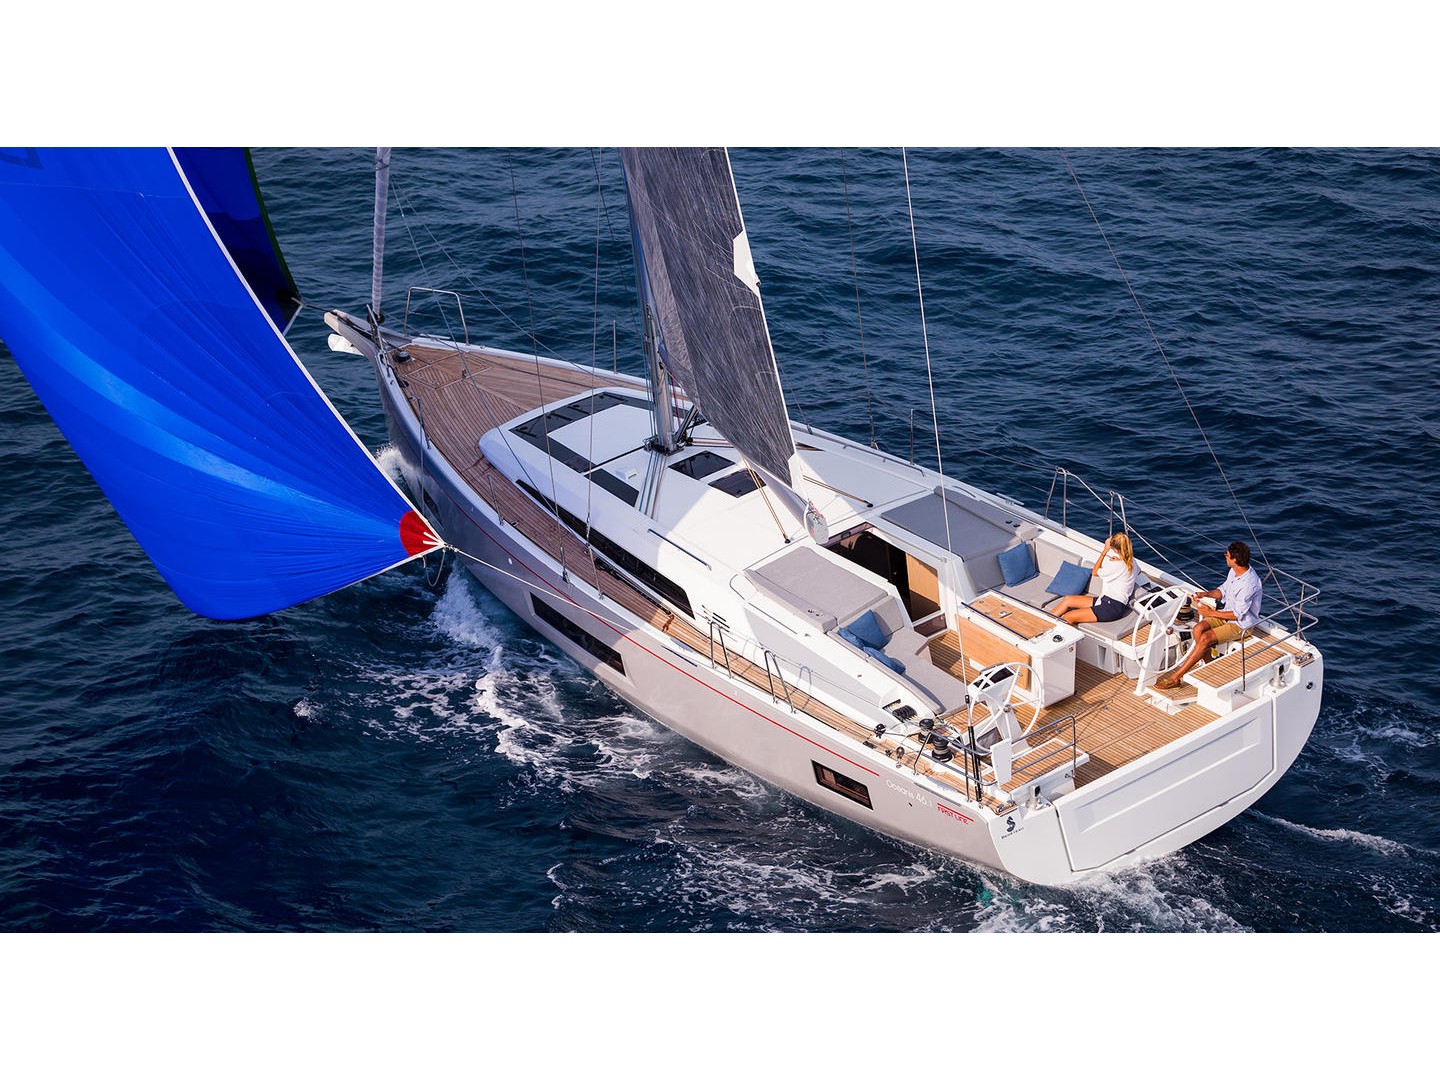 Oceanis 46.1 - Yacht Charter Salerno & Boat hire in Italy Campania Salerno Province Salerno Marina d'Arechi 2